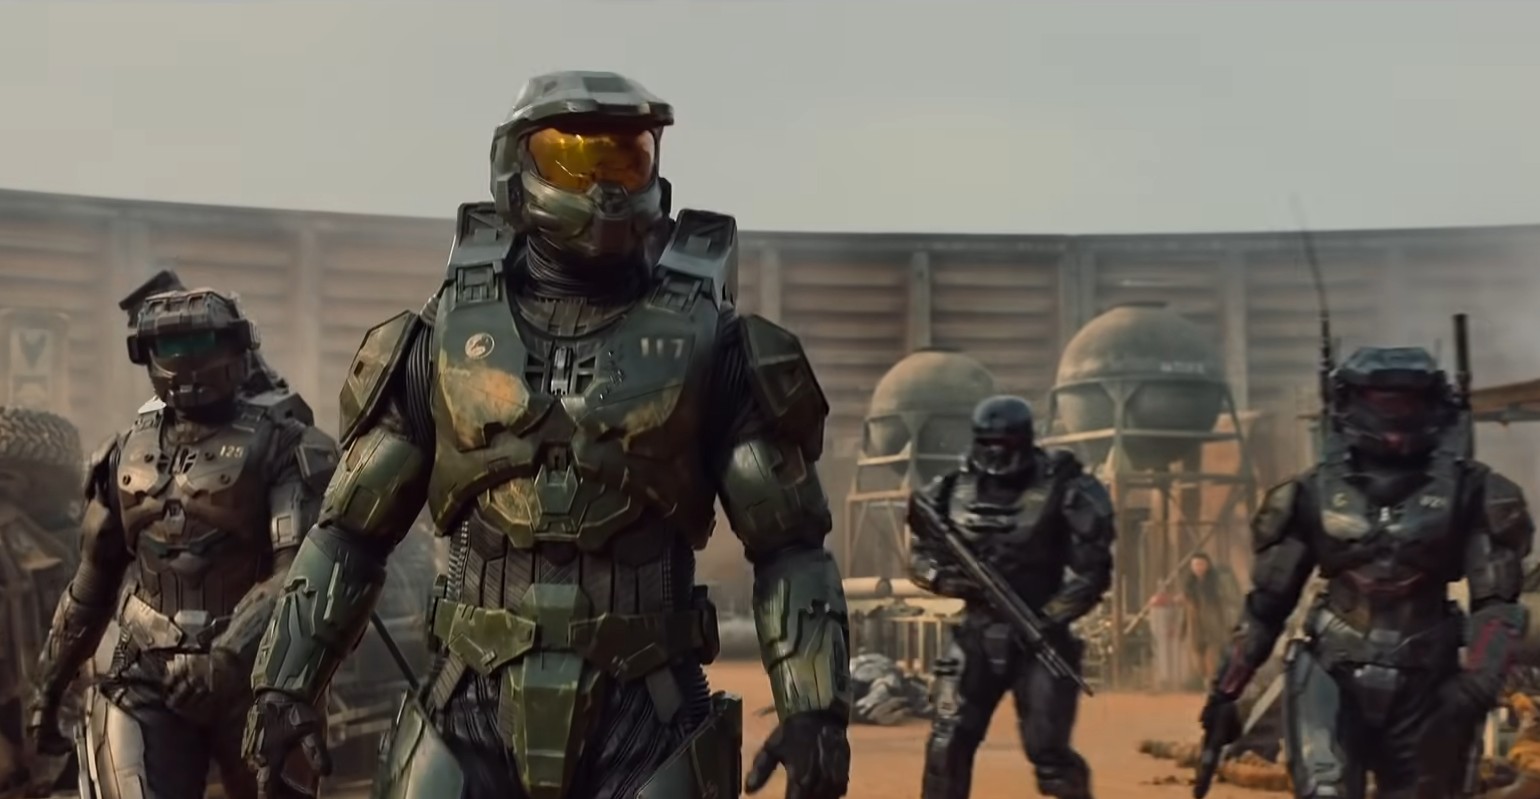 Halo The Tv Series Trailer Launch stream Date March